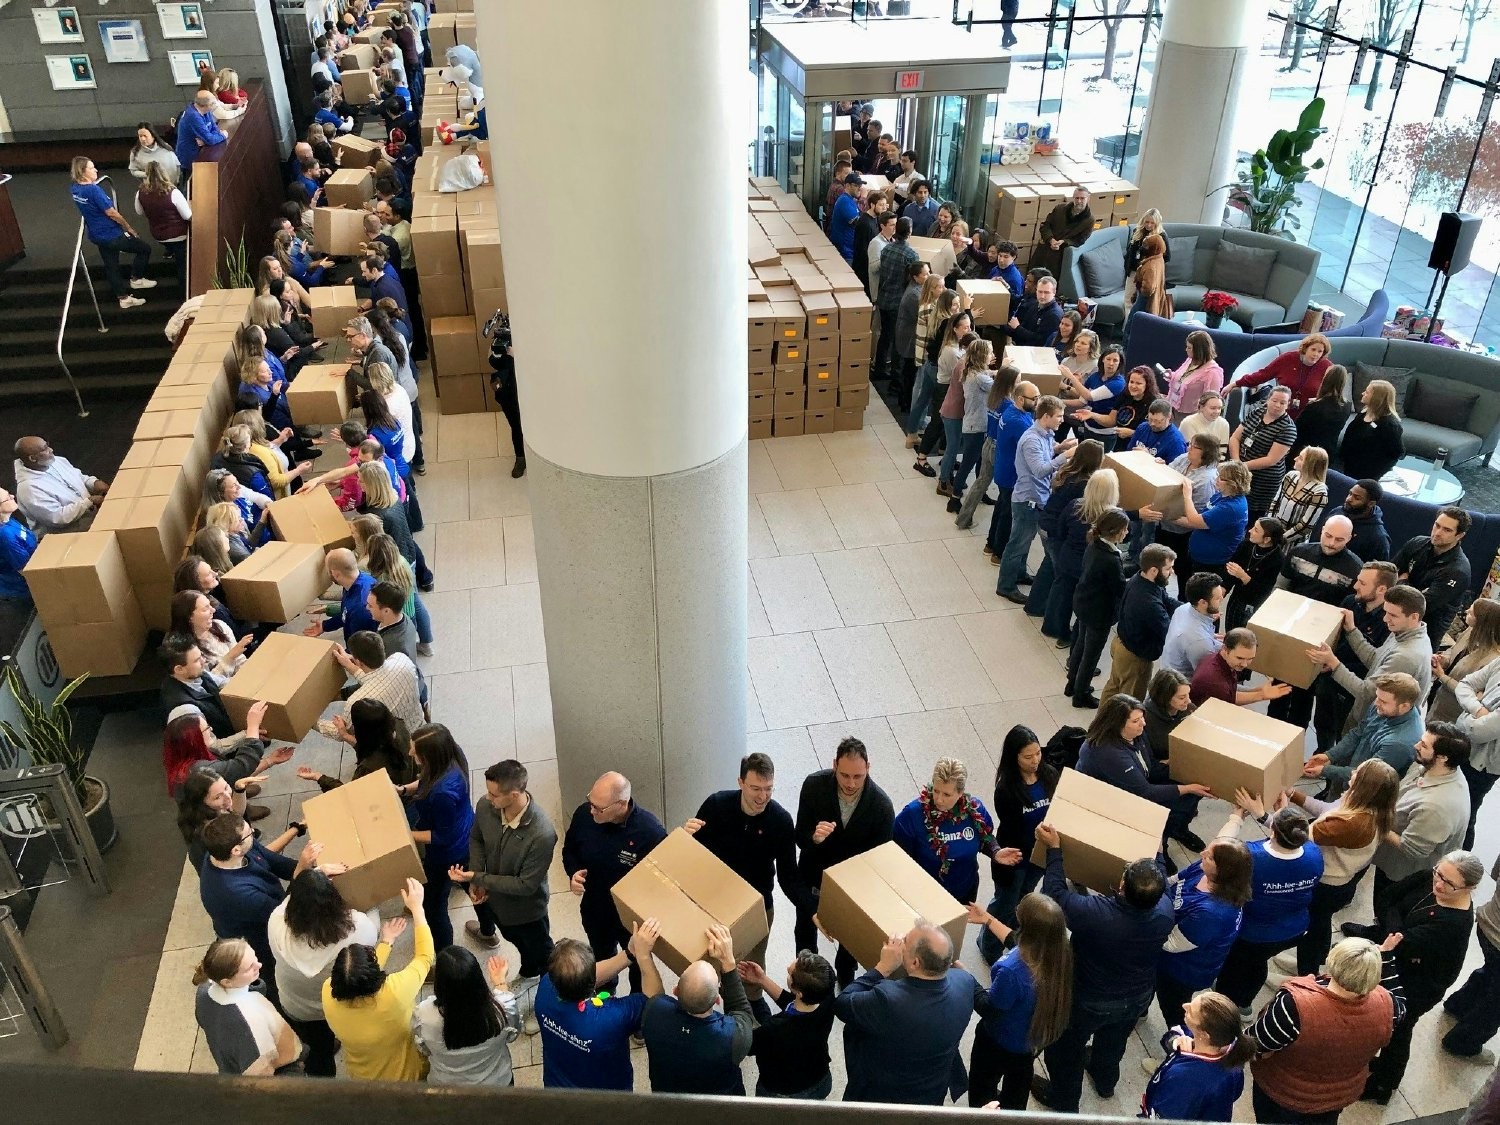 Over 250 employees gathered to help load donations of food and clothing as part of our annual holiday giving campaign.